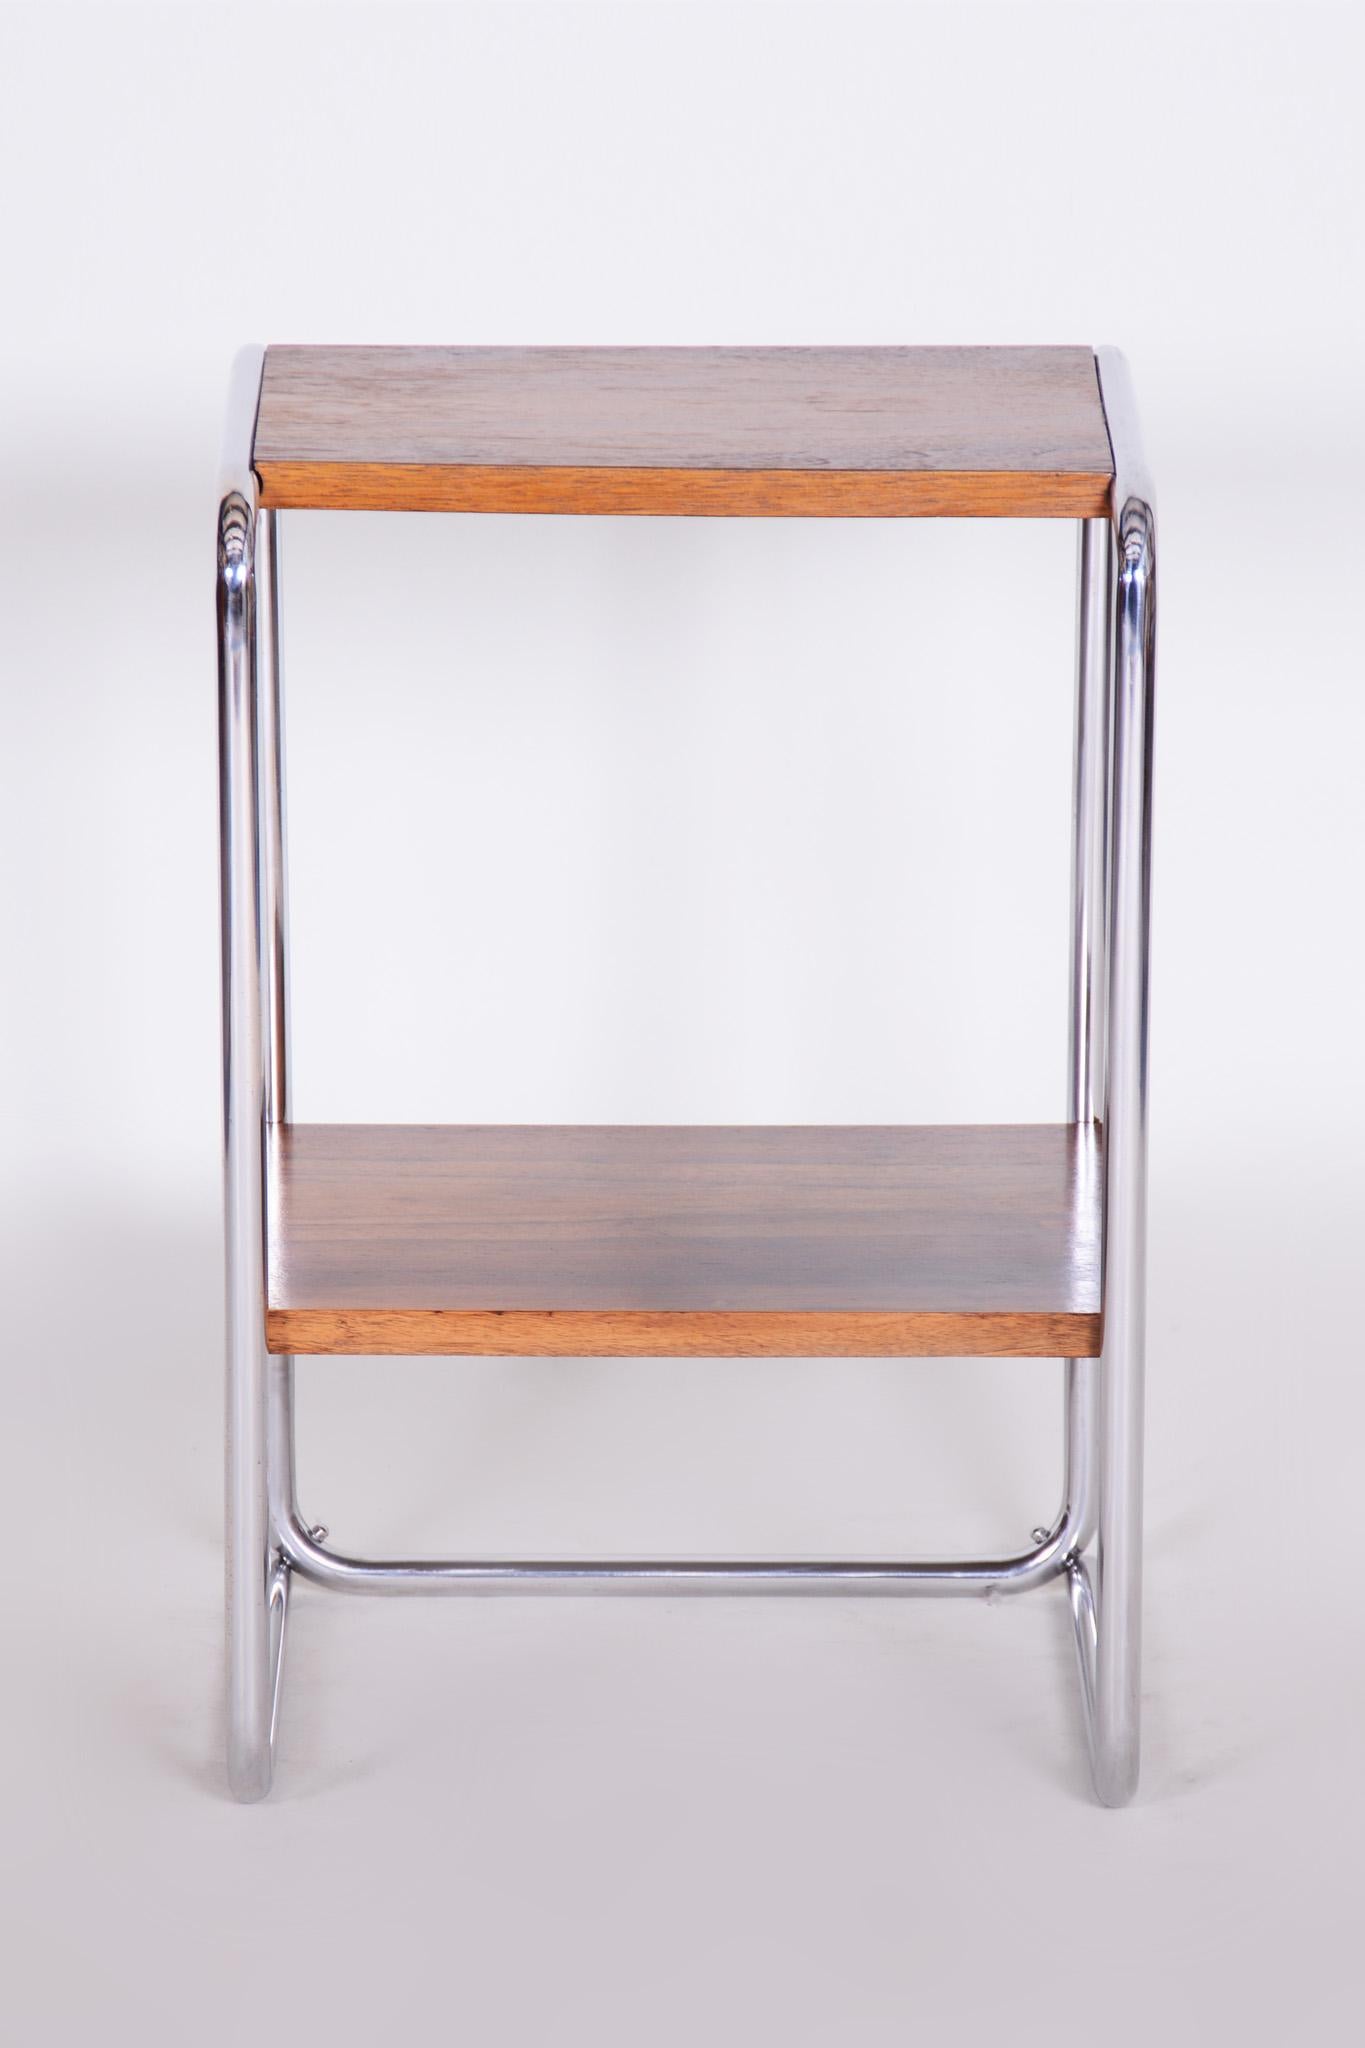 Completely restored small Czech chrome Bauhaus table.
Material: Walnut and chrome-plated steel
Period: 1930-1939
Source: Czechia.